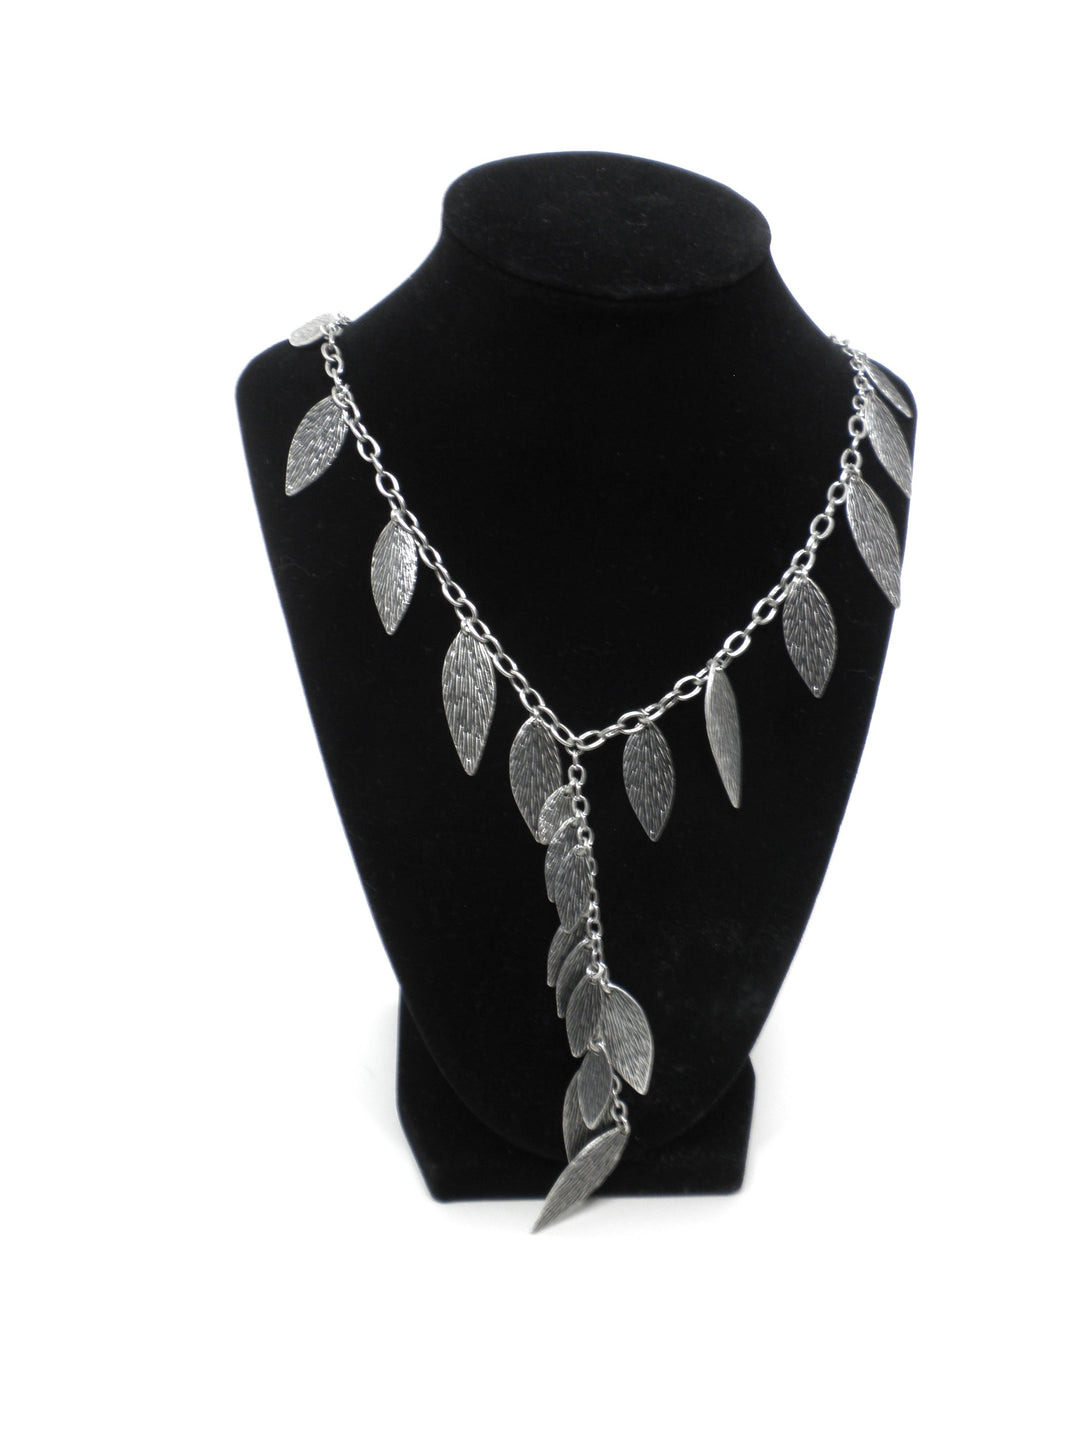 Silver Feather Chain Necklace - Donated From Designer - The Fashion Foundation